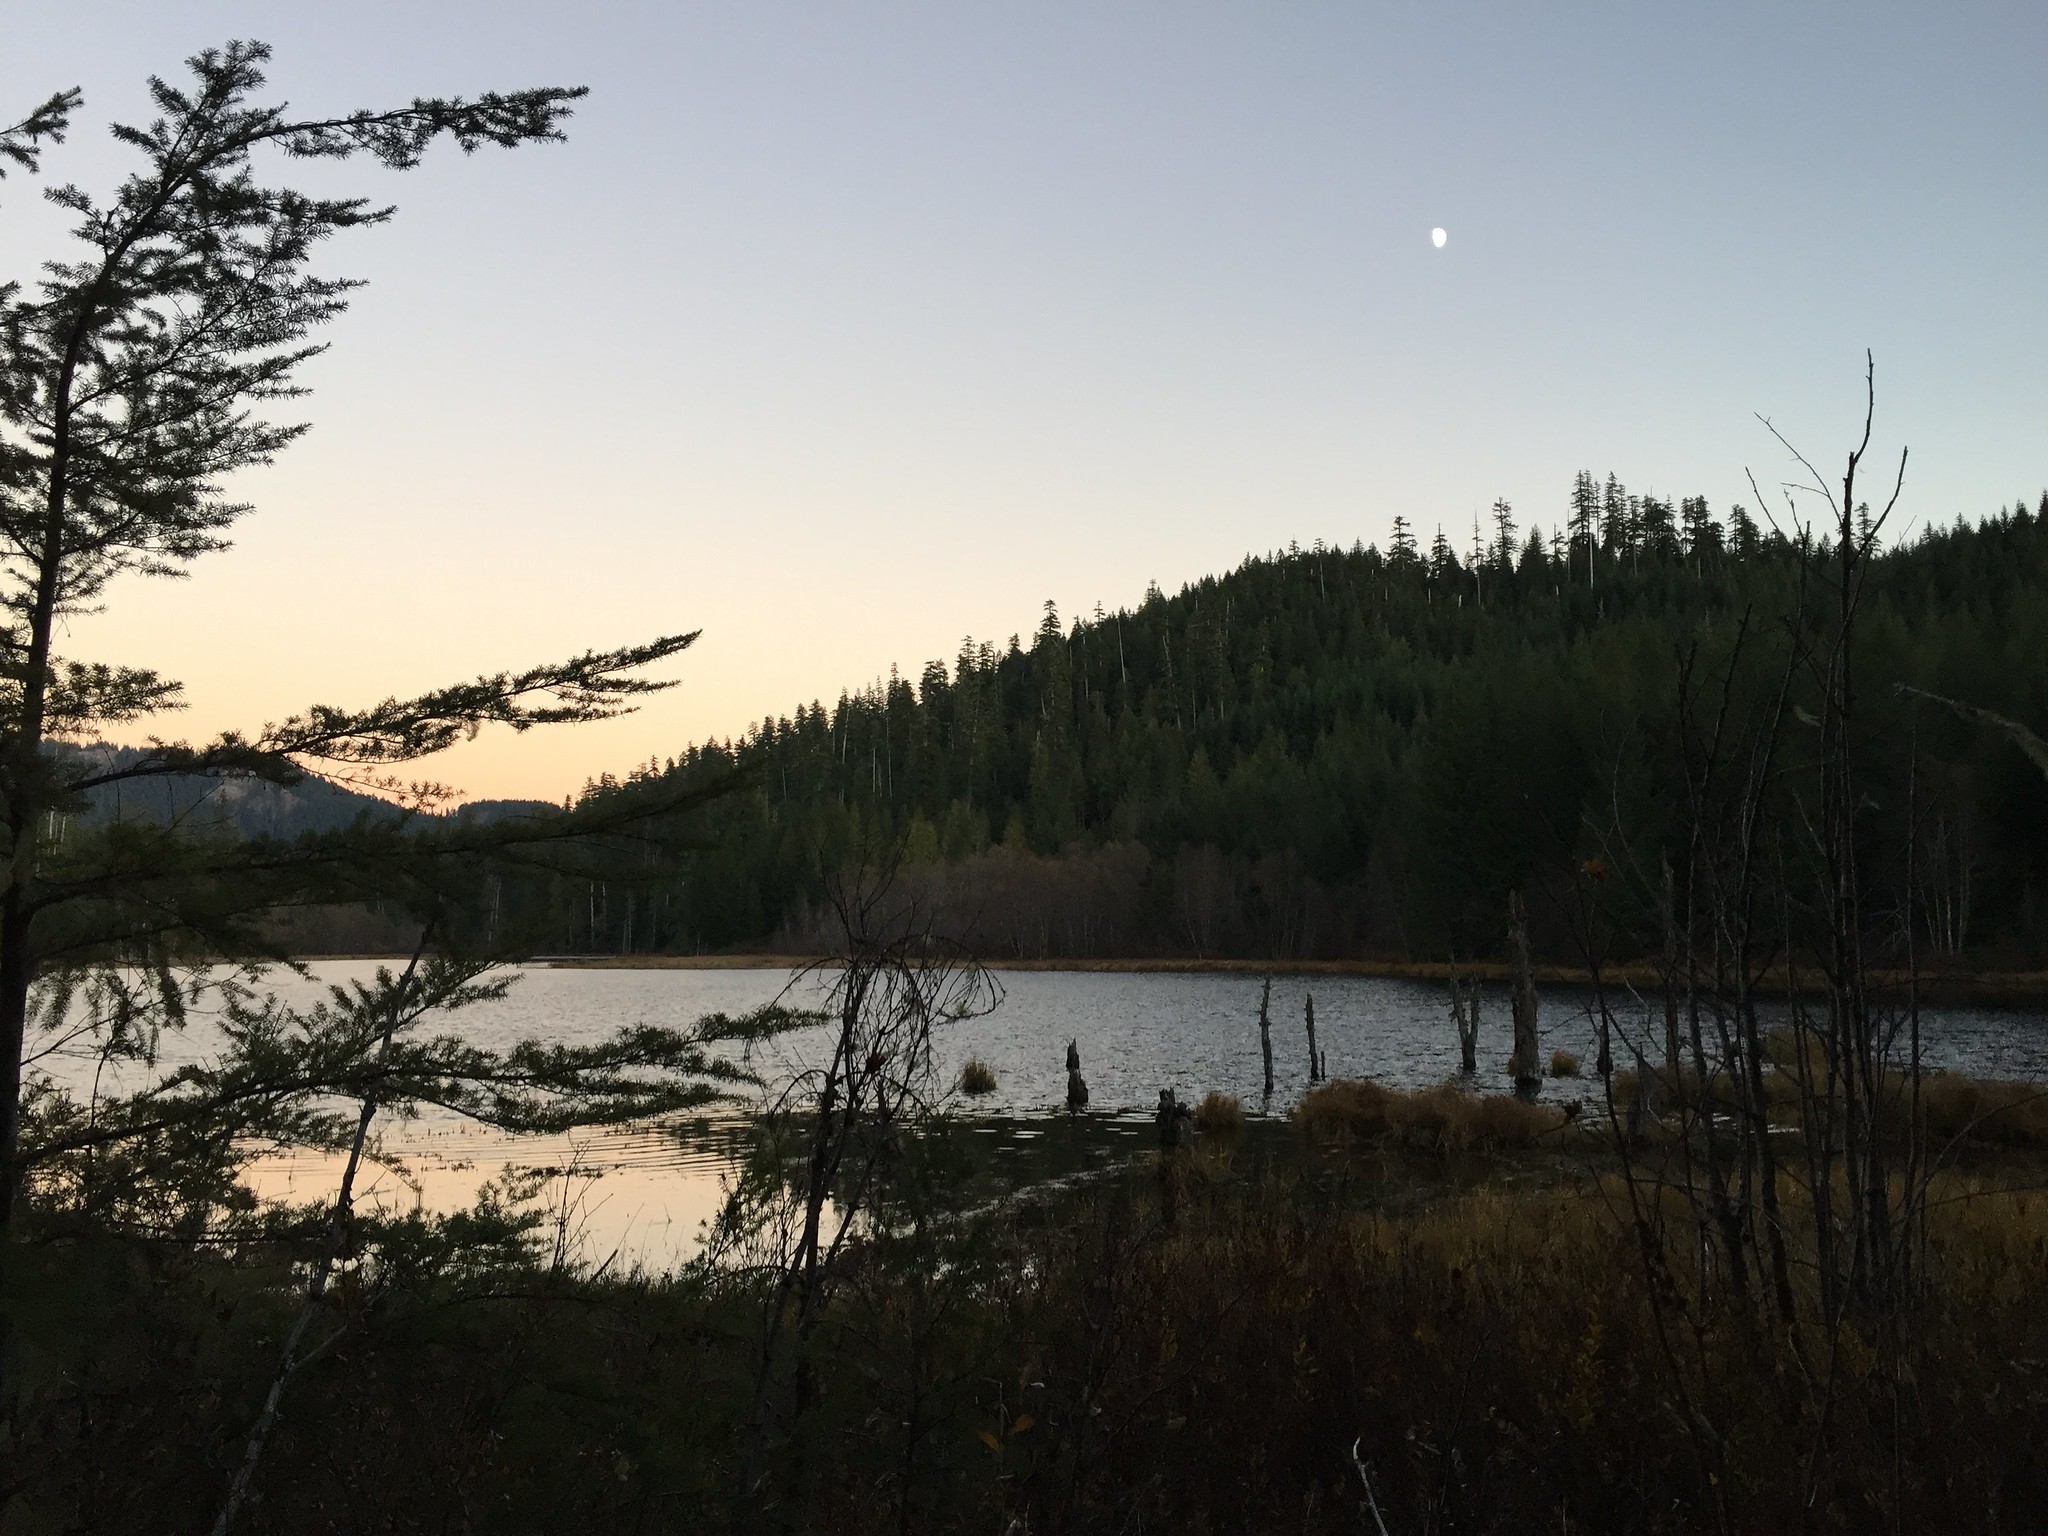 View from the campsite, showing moon rising over a pond above a little mountain